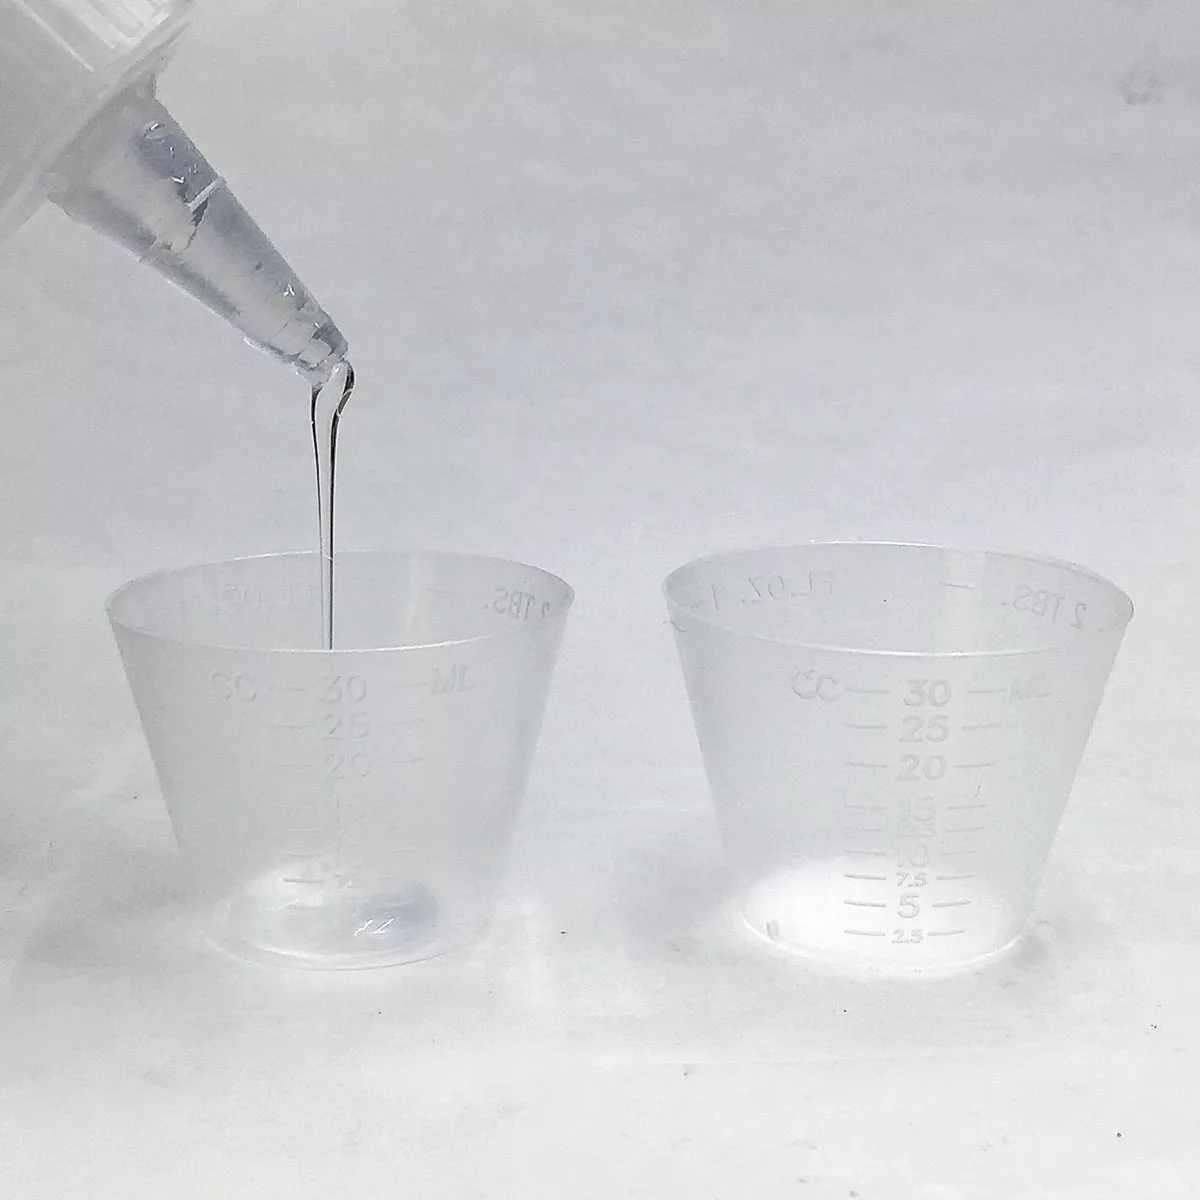 measuring epoxy resin and hardener into cups